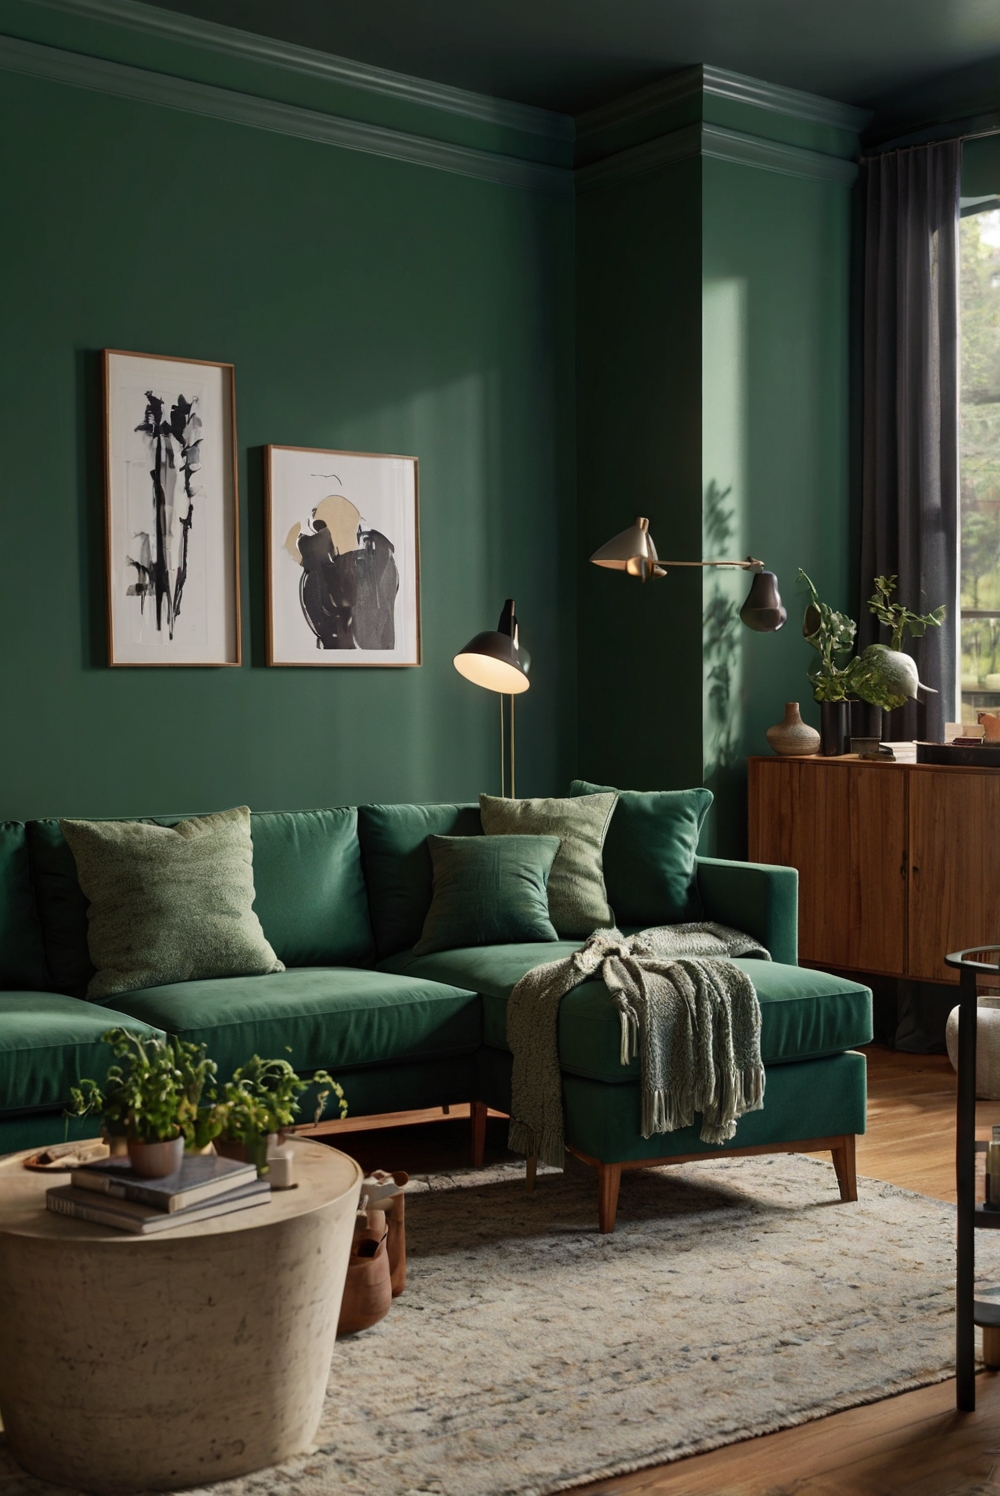 Hunter Green paint, Harmony walls, wall paint color, interior design, home decor, space planning, kitchen design